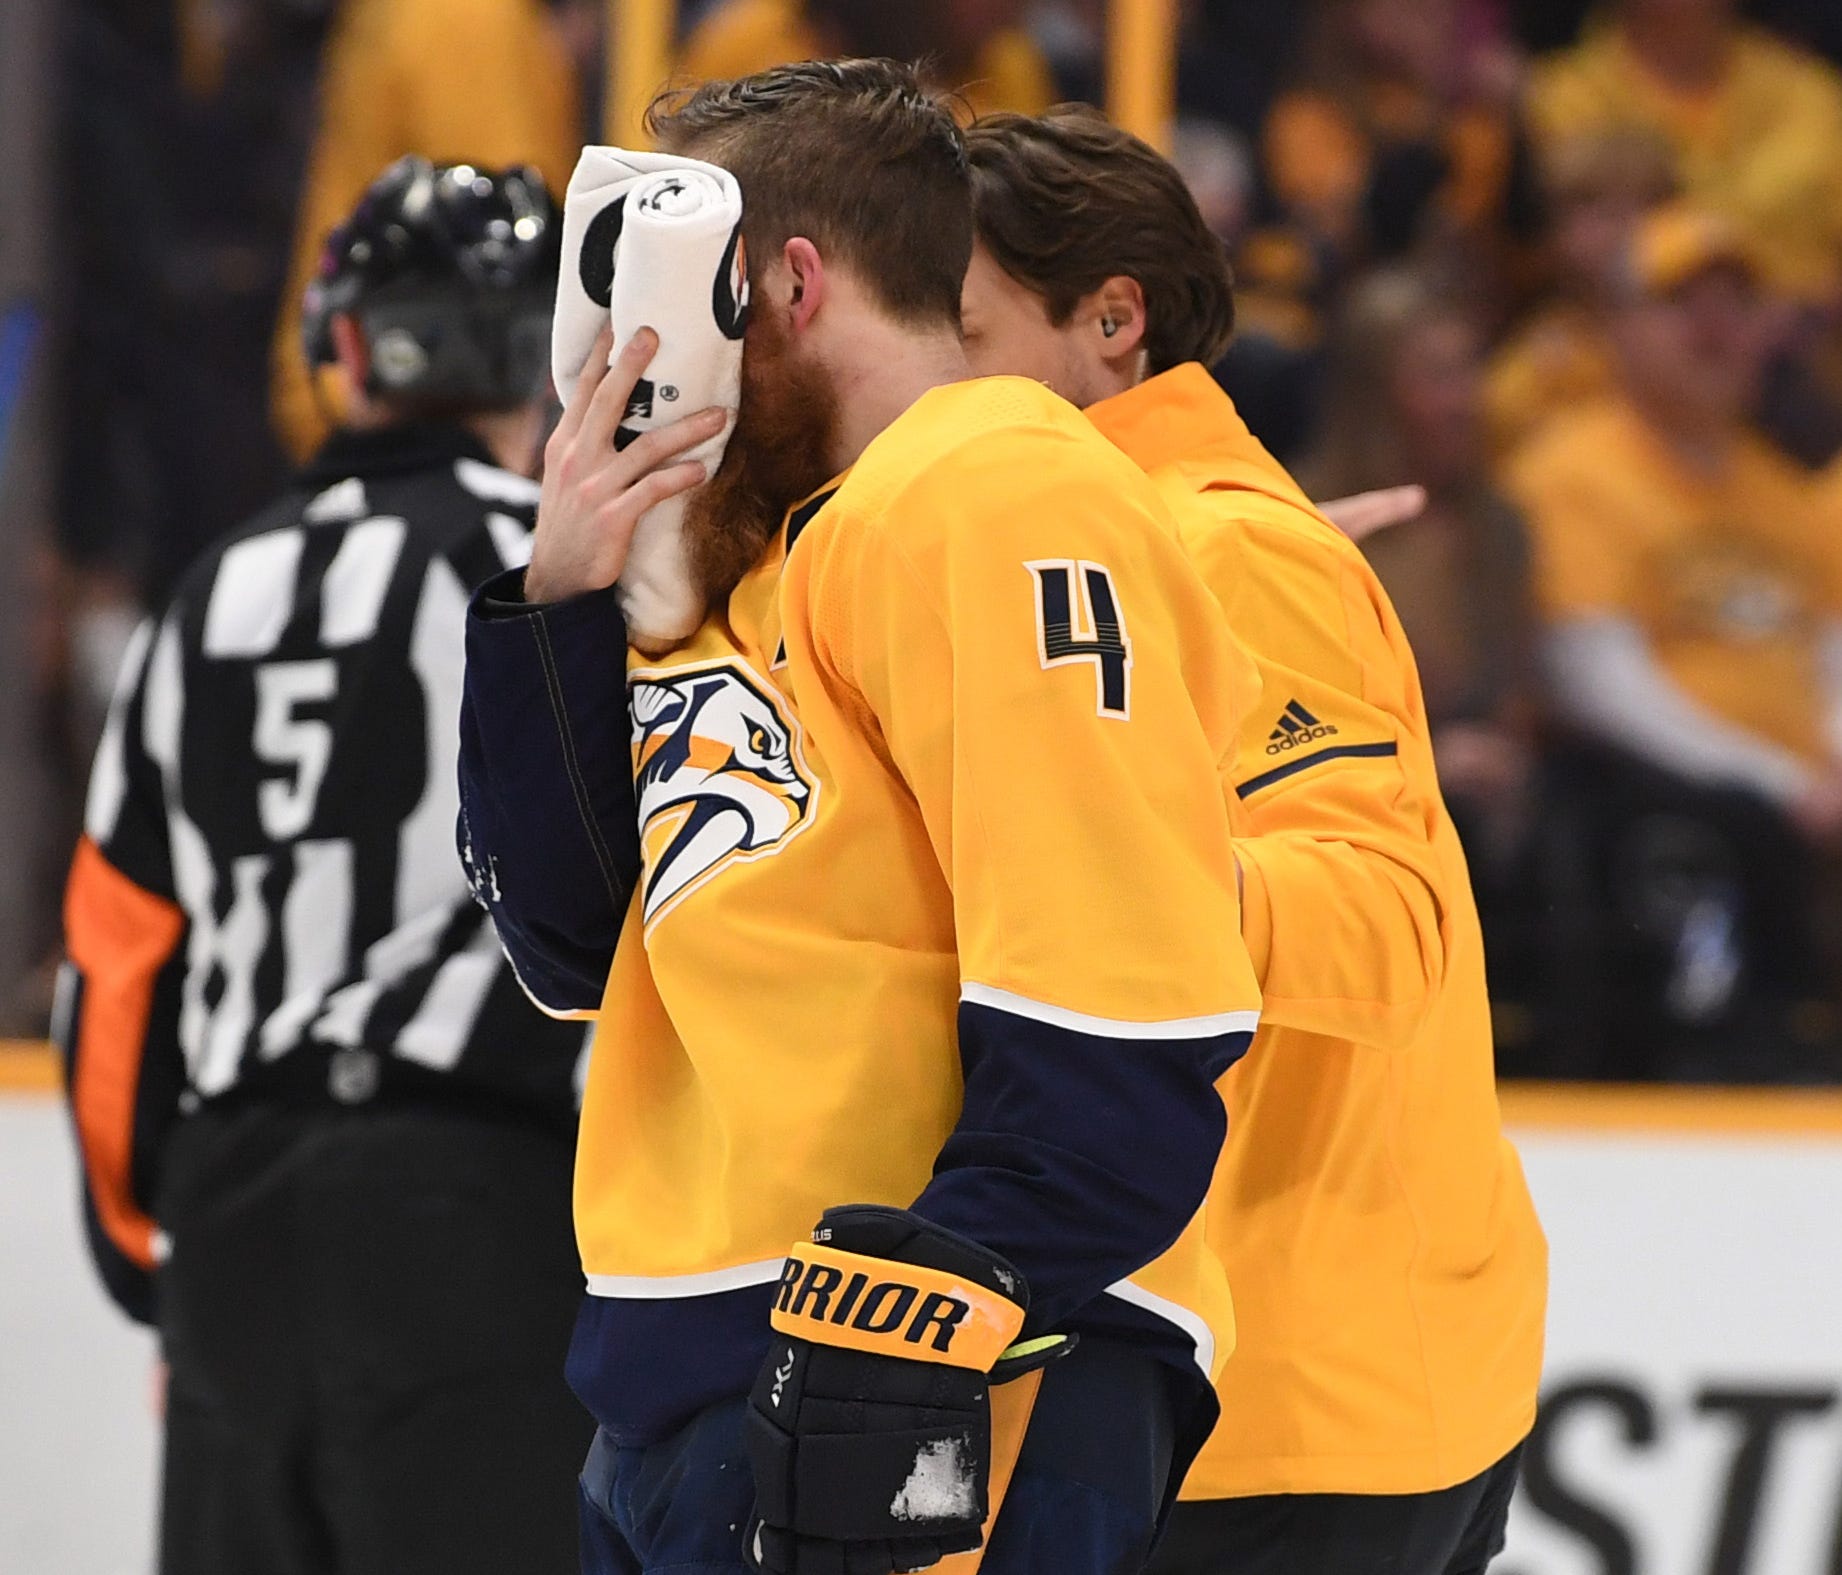 Nashville Predators defenseman Ryan Ellis is helped off the ice after taking a skate to the face during the third period against the Winnipeg Jets in Game 1 of their second-round series.